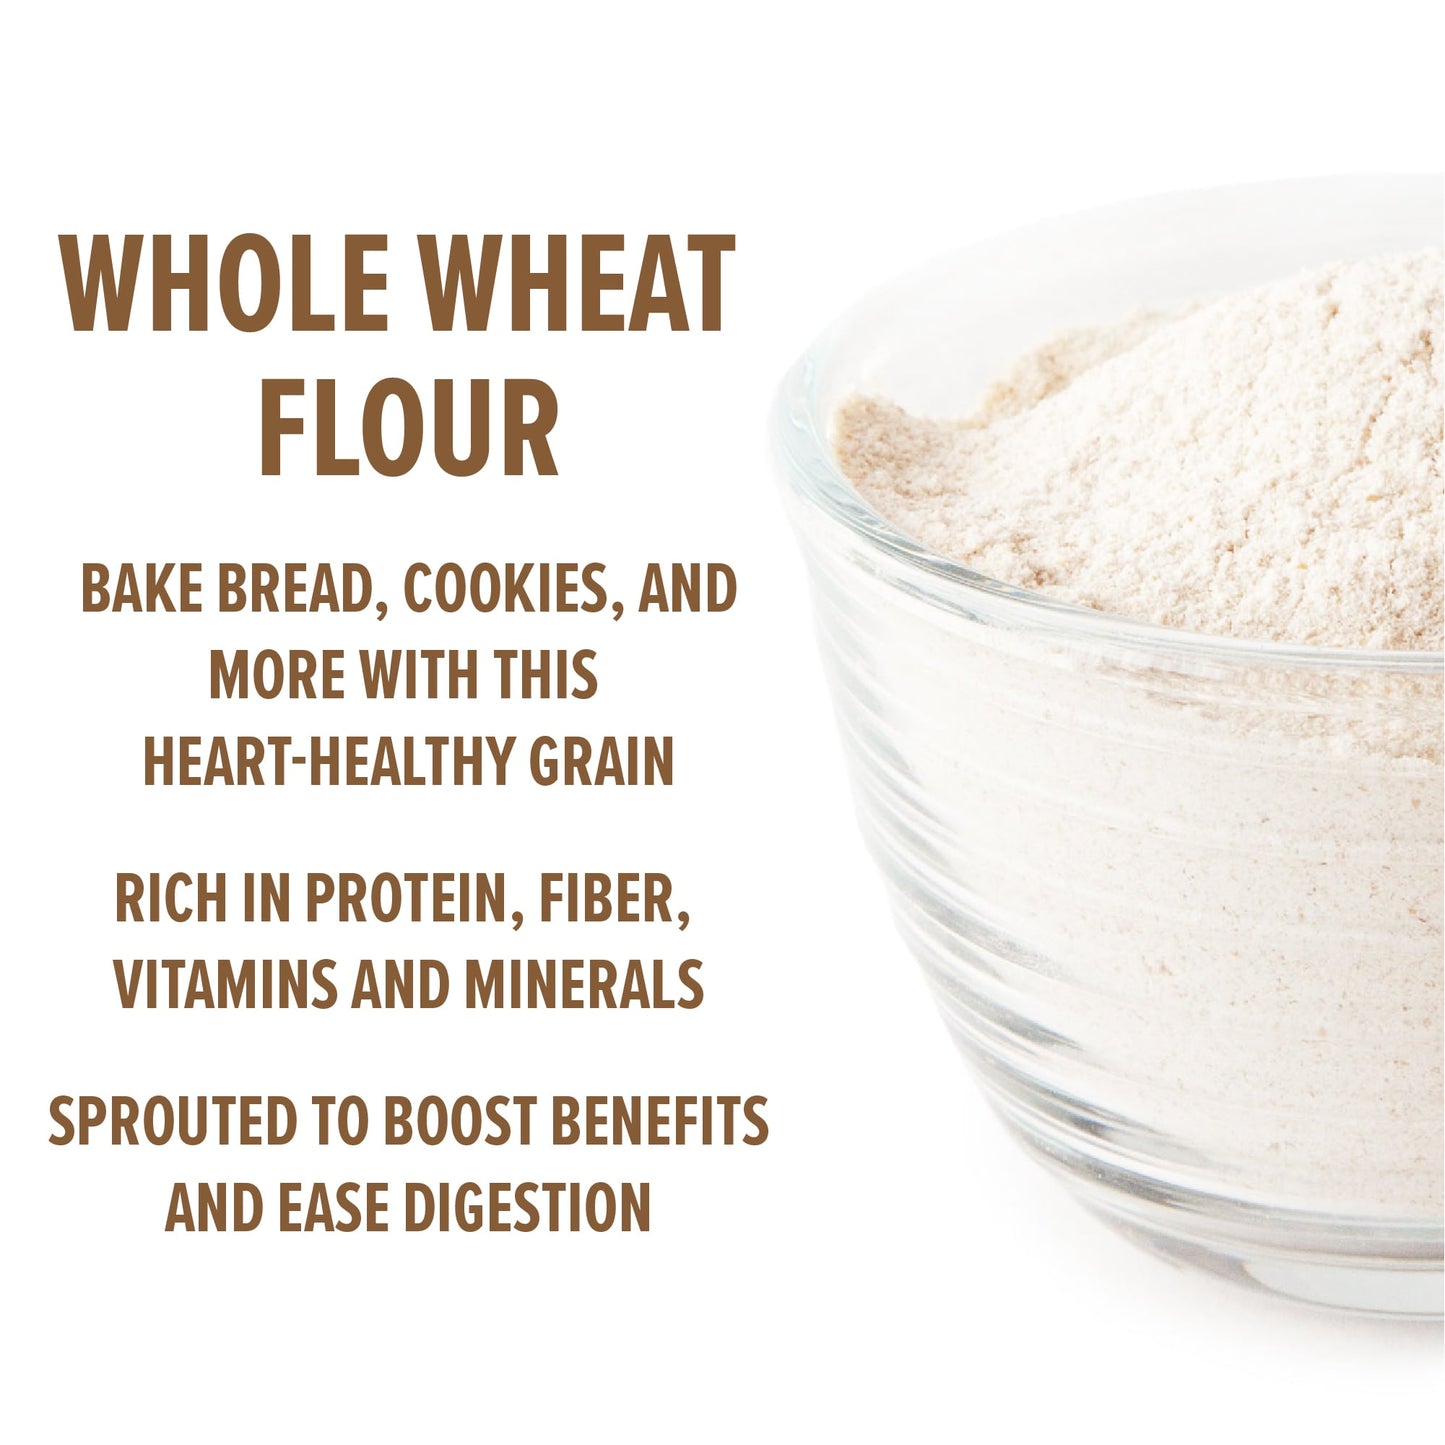 Organic Sprouted Whole Wheat Flour (5 lb. bags)